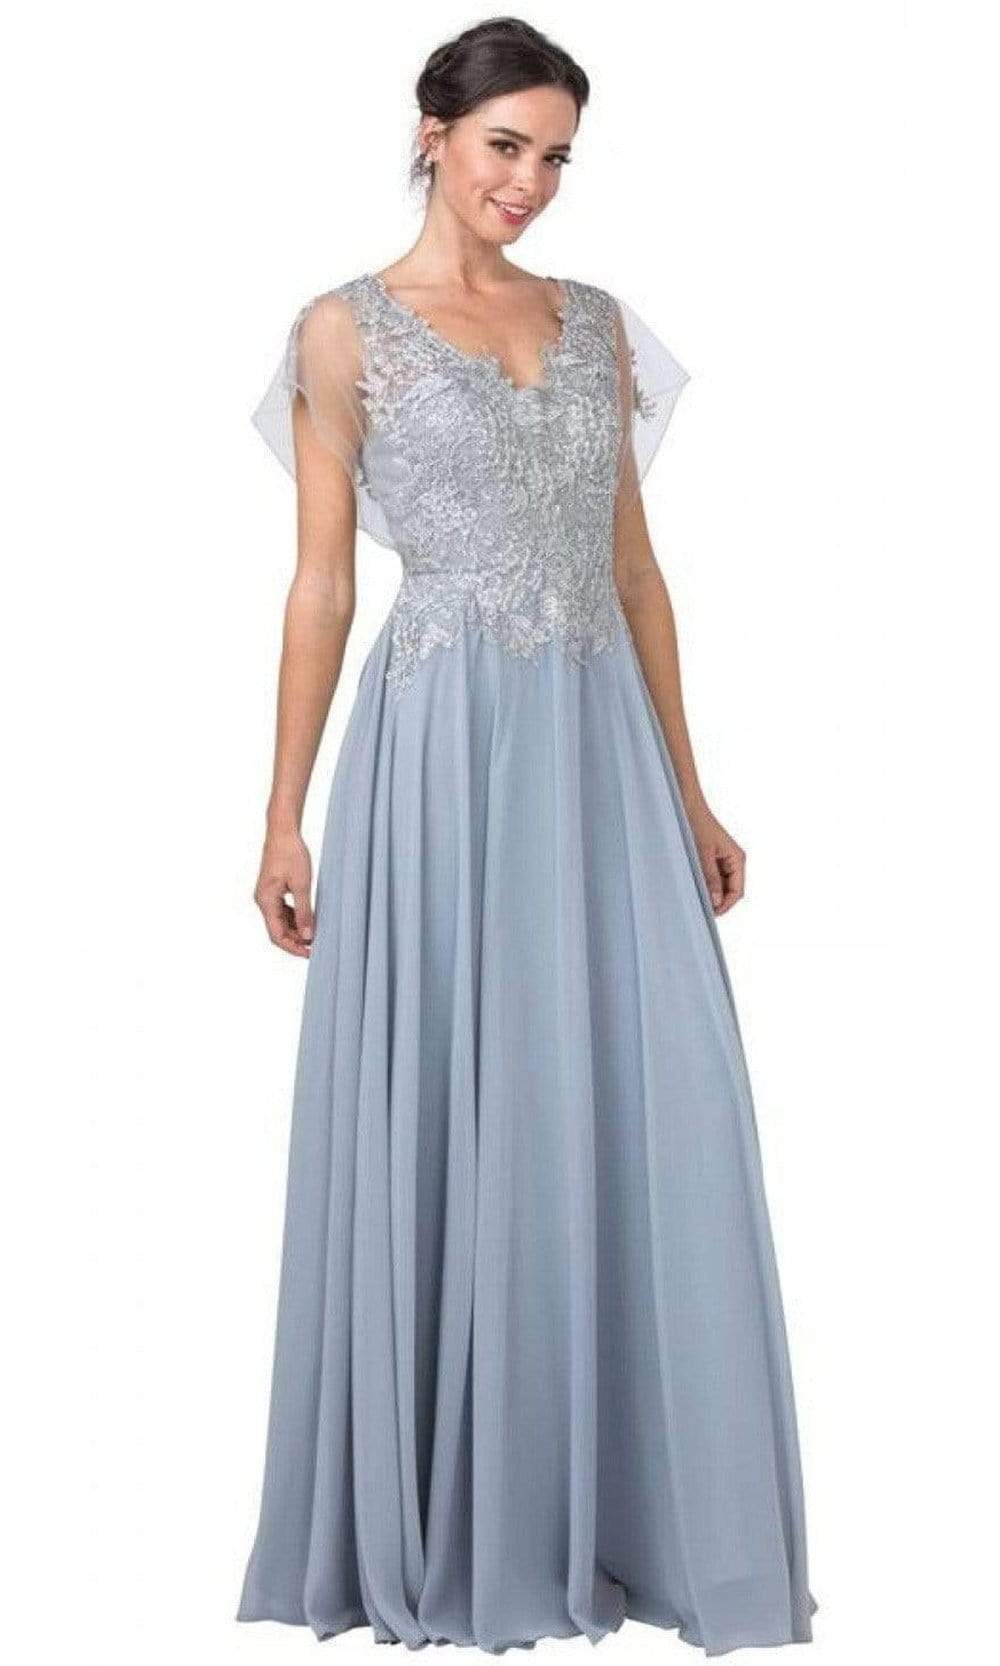 Aspeed Design - M2386 Mesh Sleeve Embroidered Dress Mother of the Bride Dresses XXS / Silver